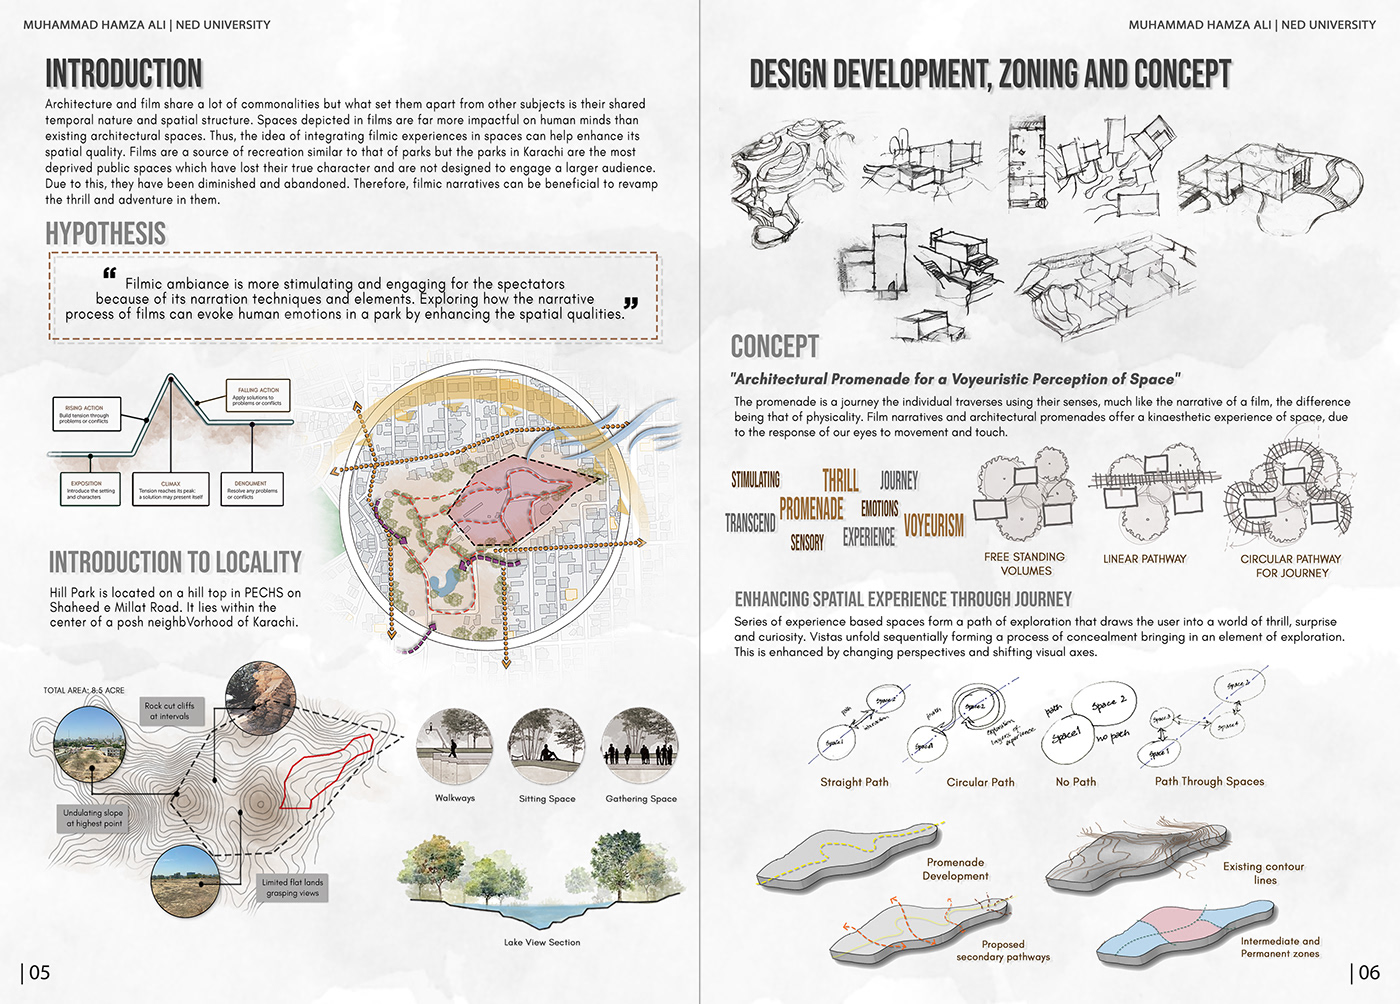 Thesis Project architectural thesis experience design urban planning 3D Visualization Masterplan architecture Film and architecture Film Narrative sensory design